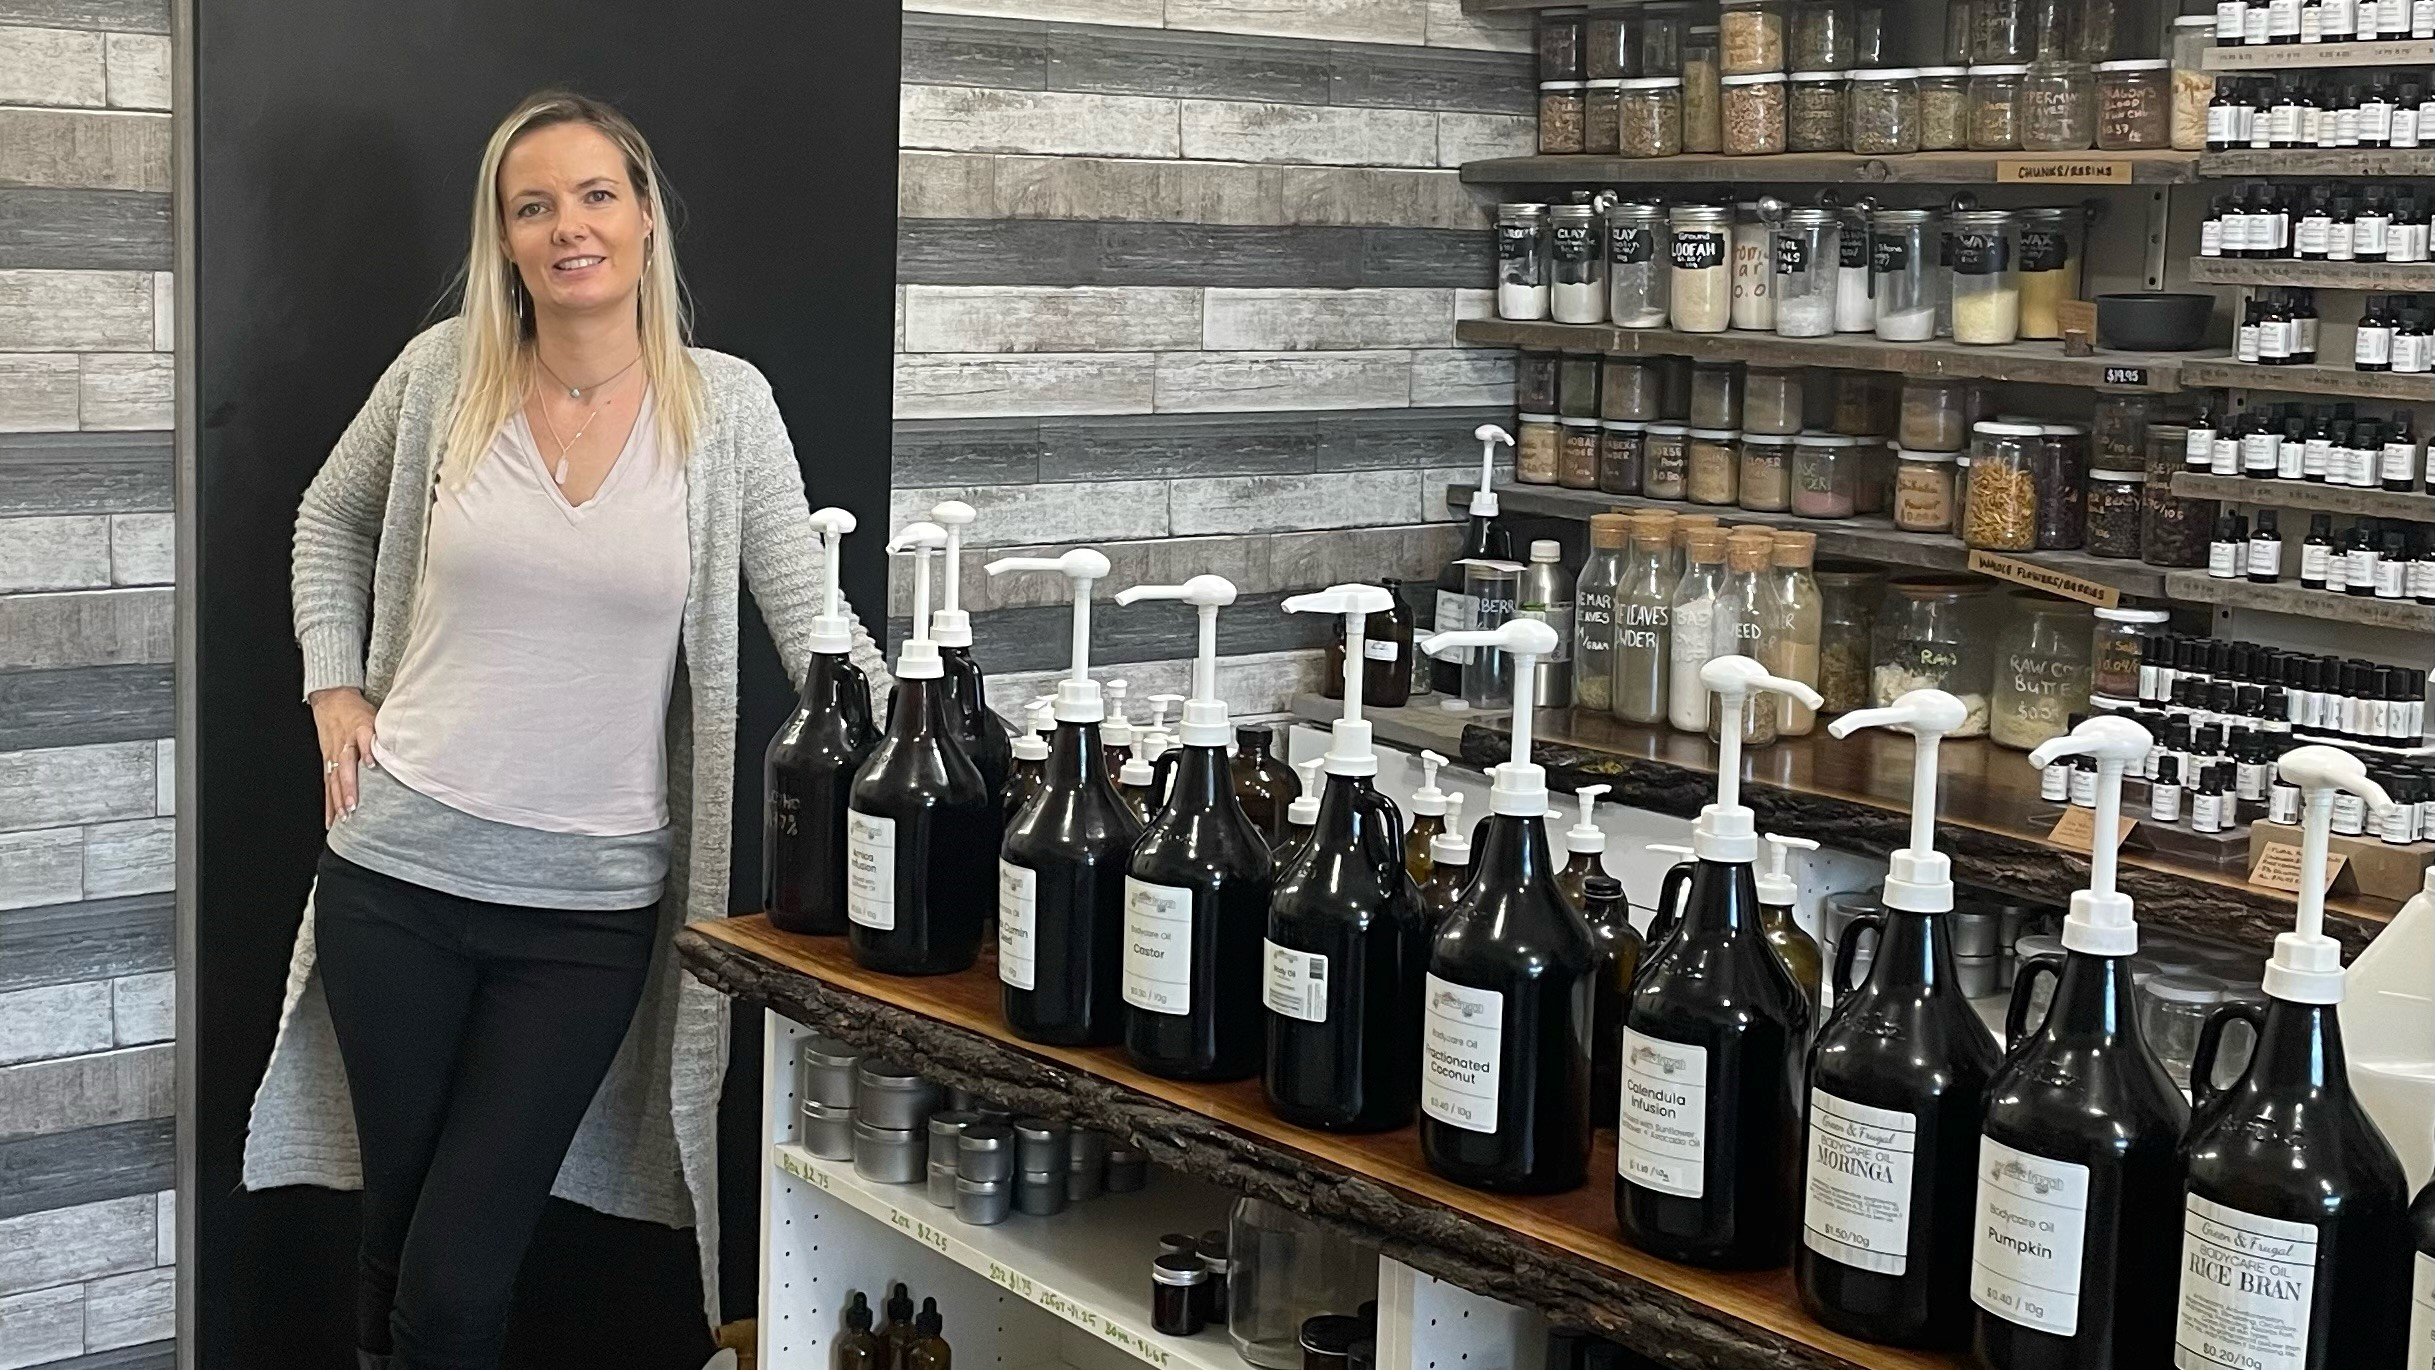 Green and Frugal owner Tara Holguin standing next to products.